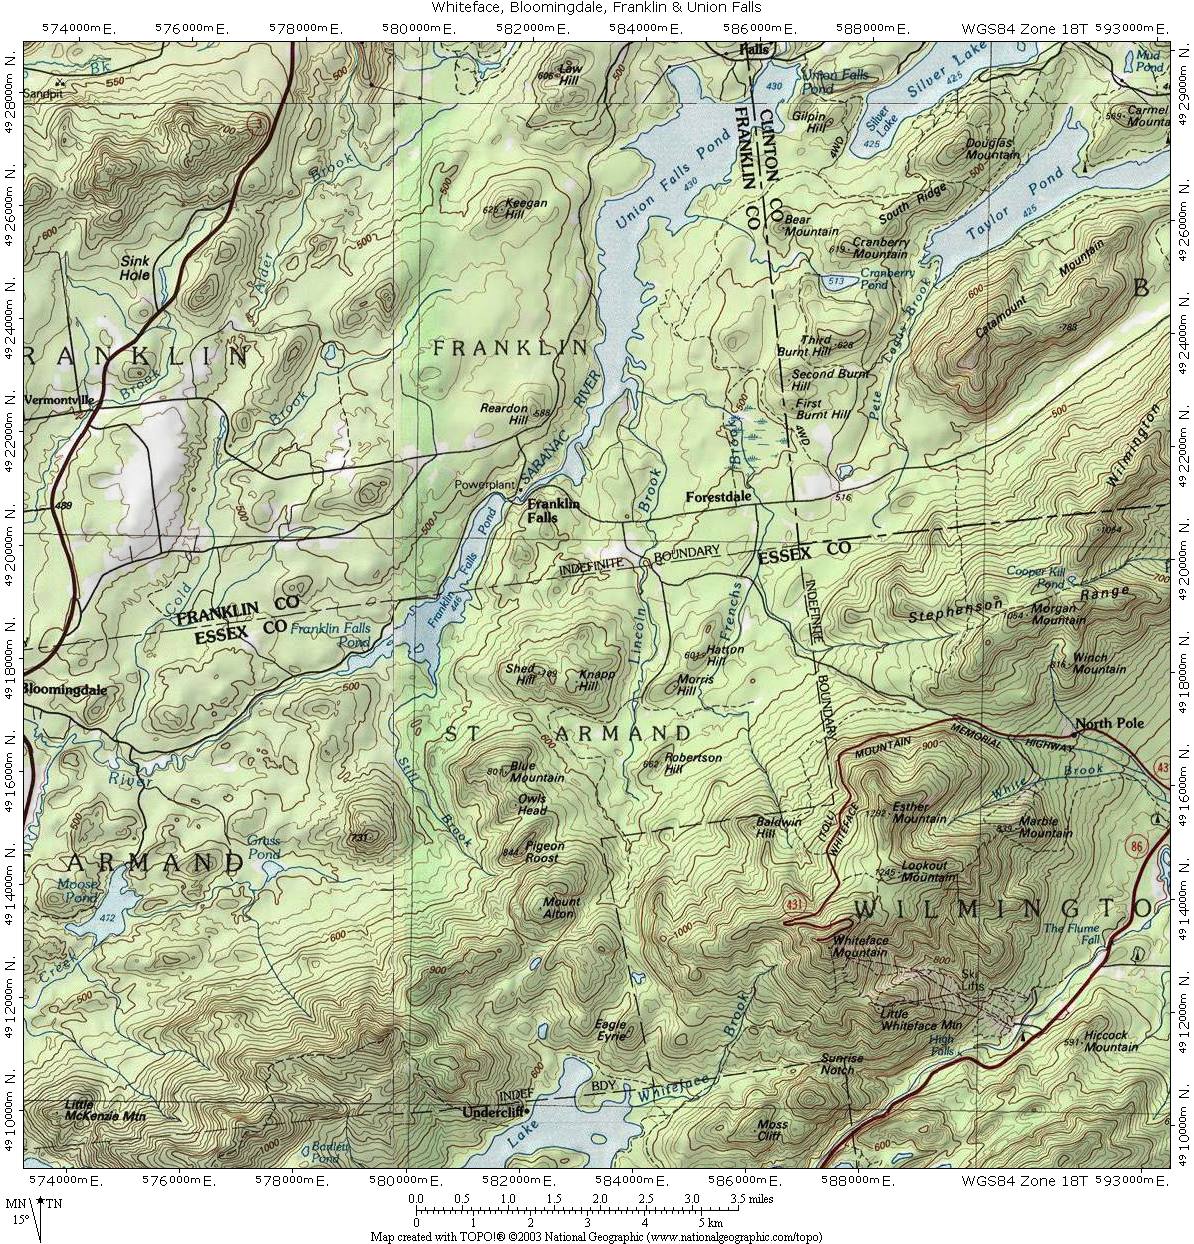 Whiteface Mt., Franklin and Union Falls, Bloomingdale and the Saranac River Topographic Map